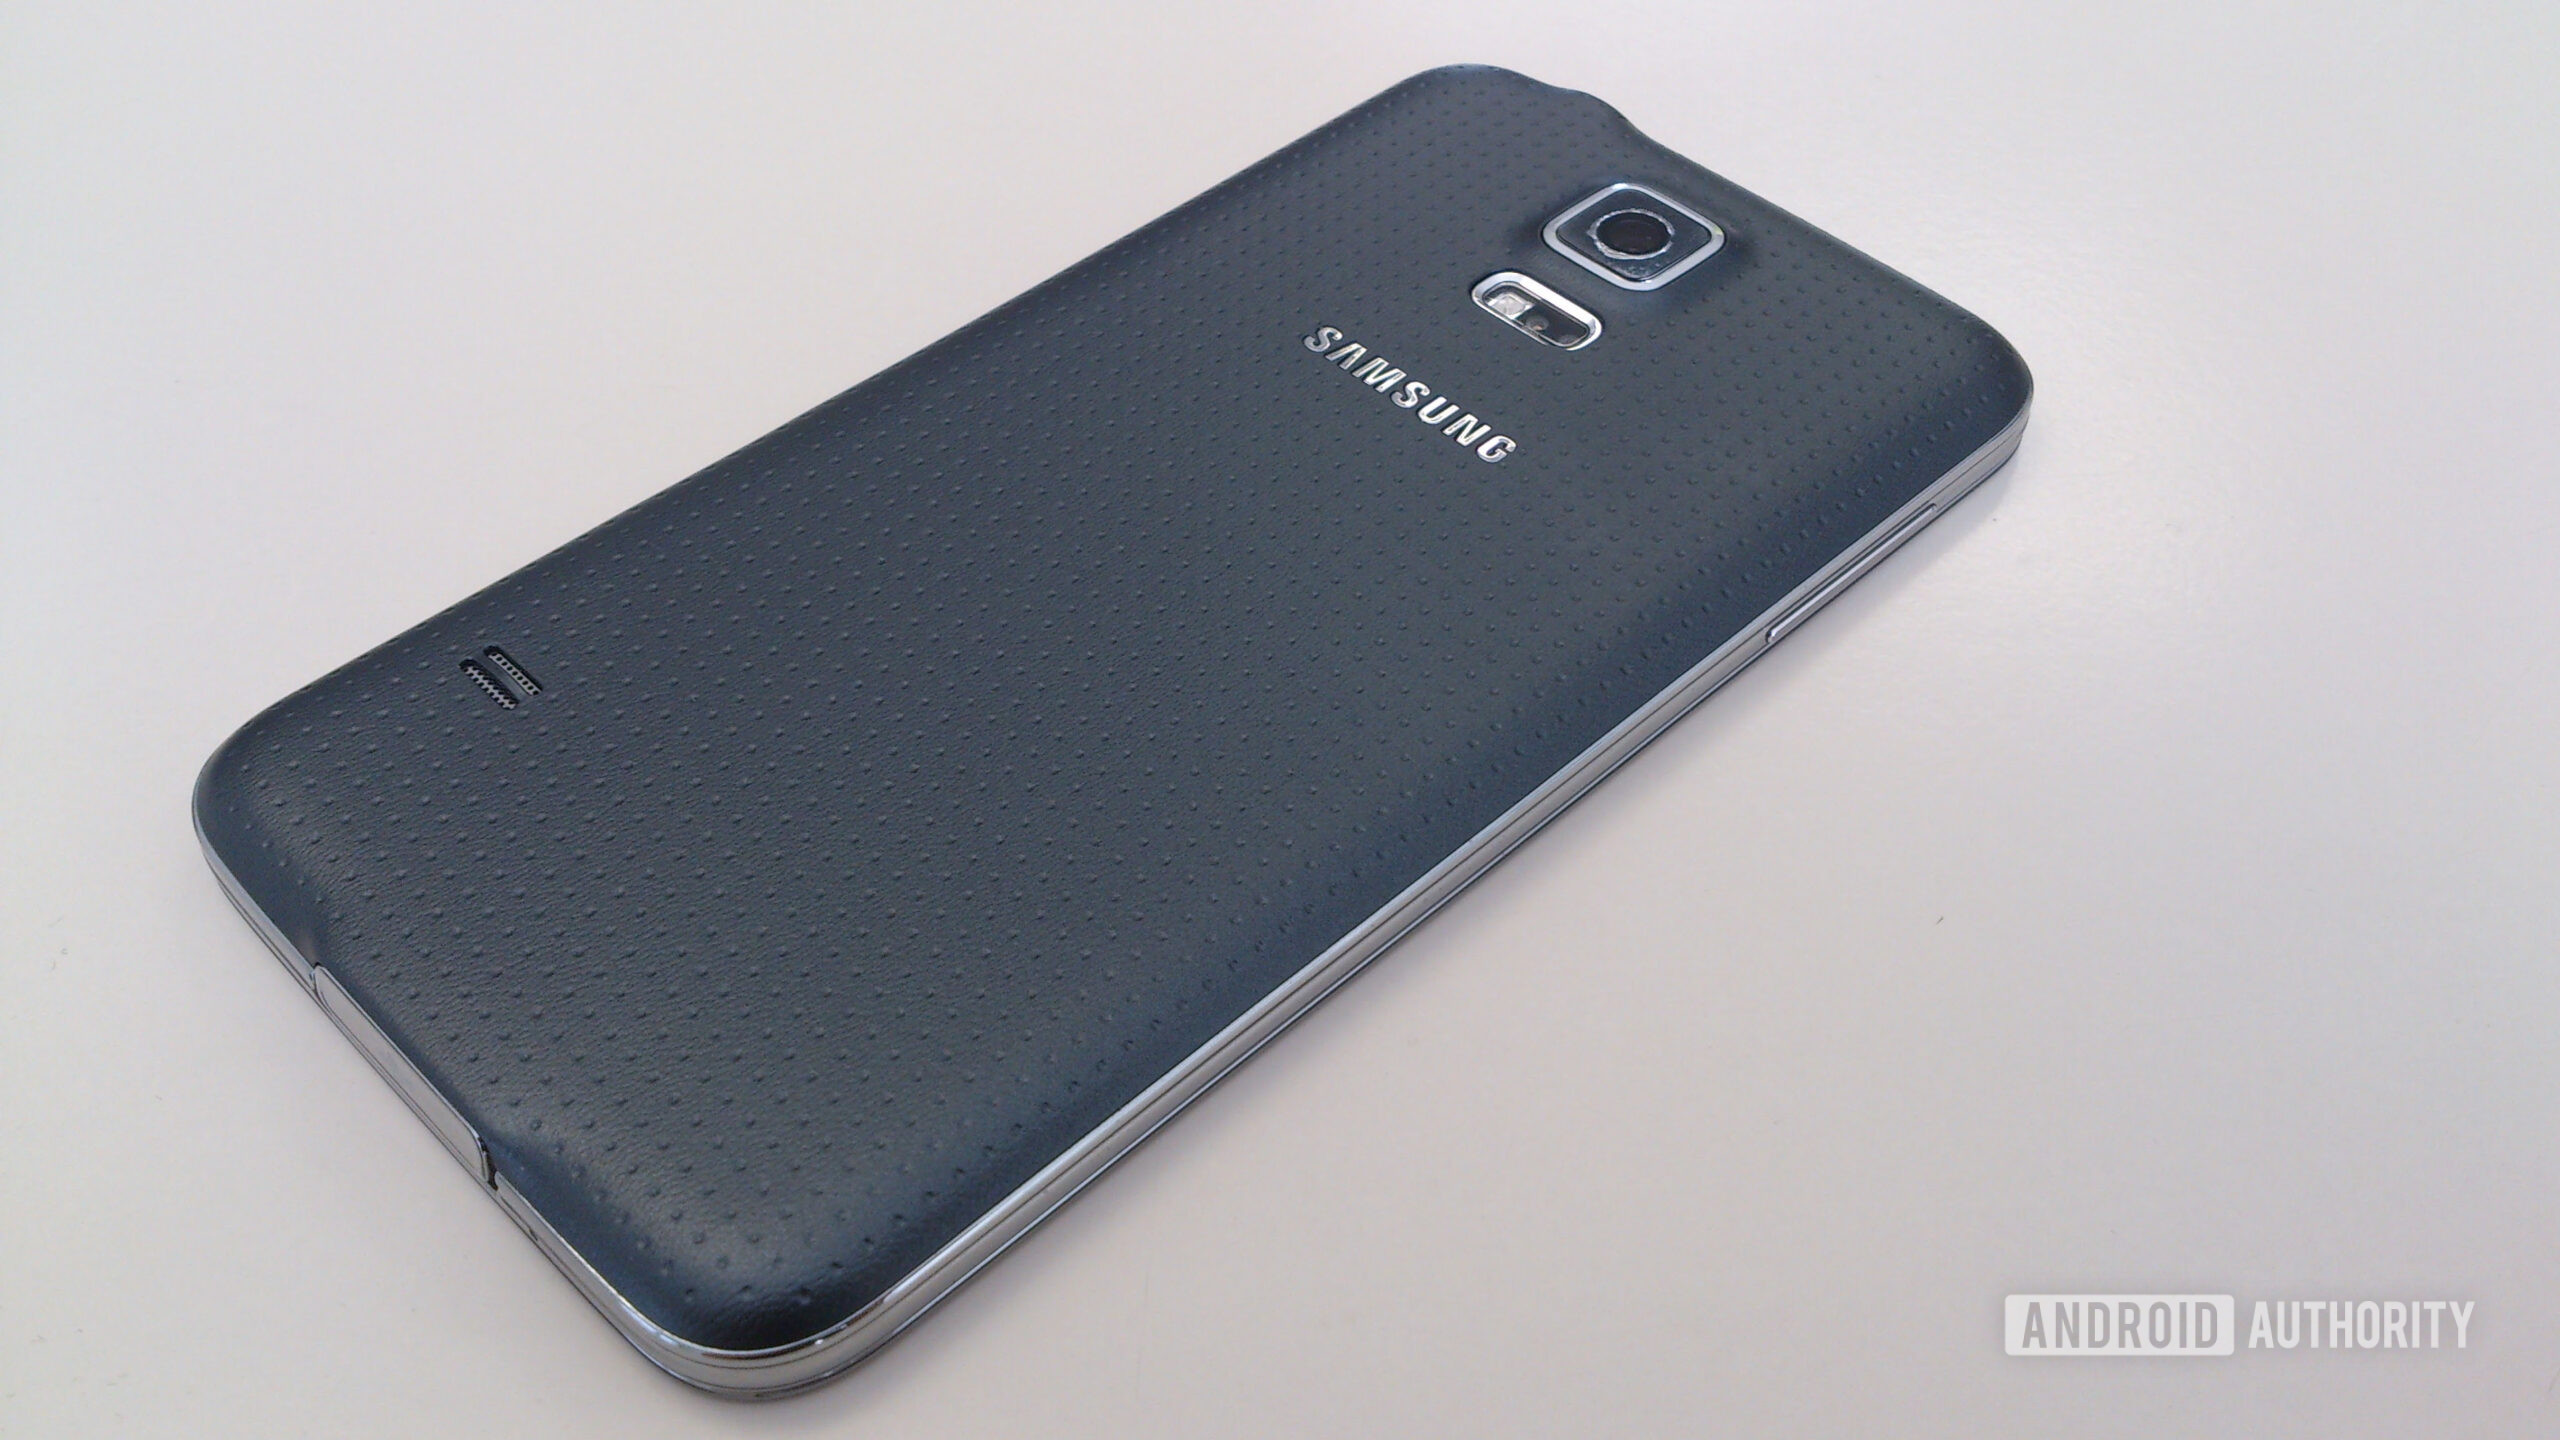 Samsung Galaxy S5 review unit